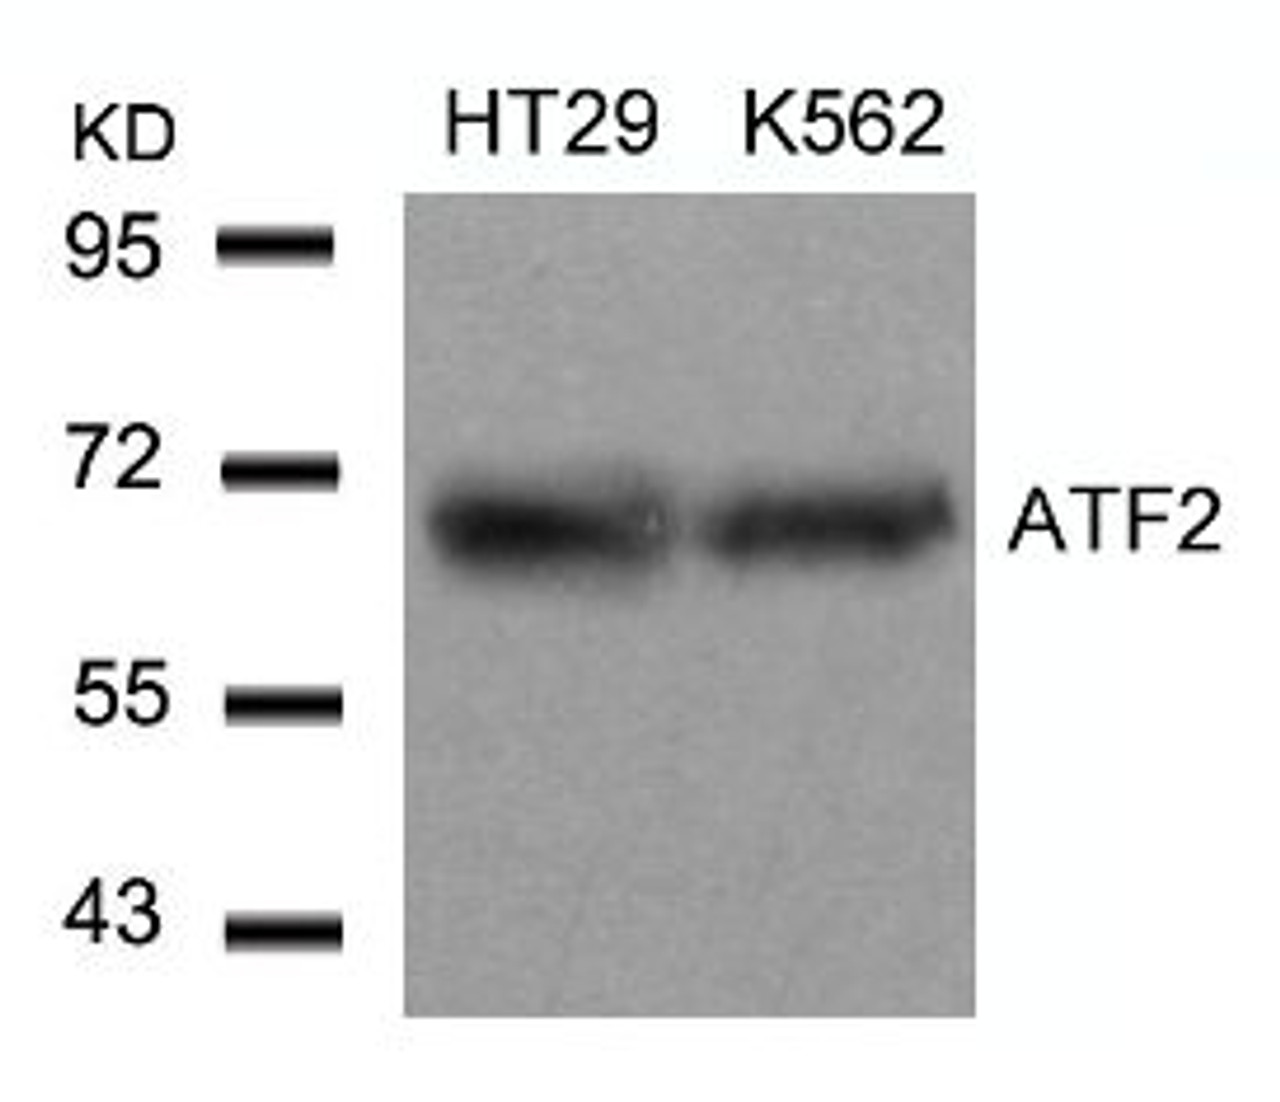 Western blot analysis of lysed extracts from HT29 and K562 cells using ATF2 (Ab-71 or 53) .